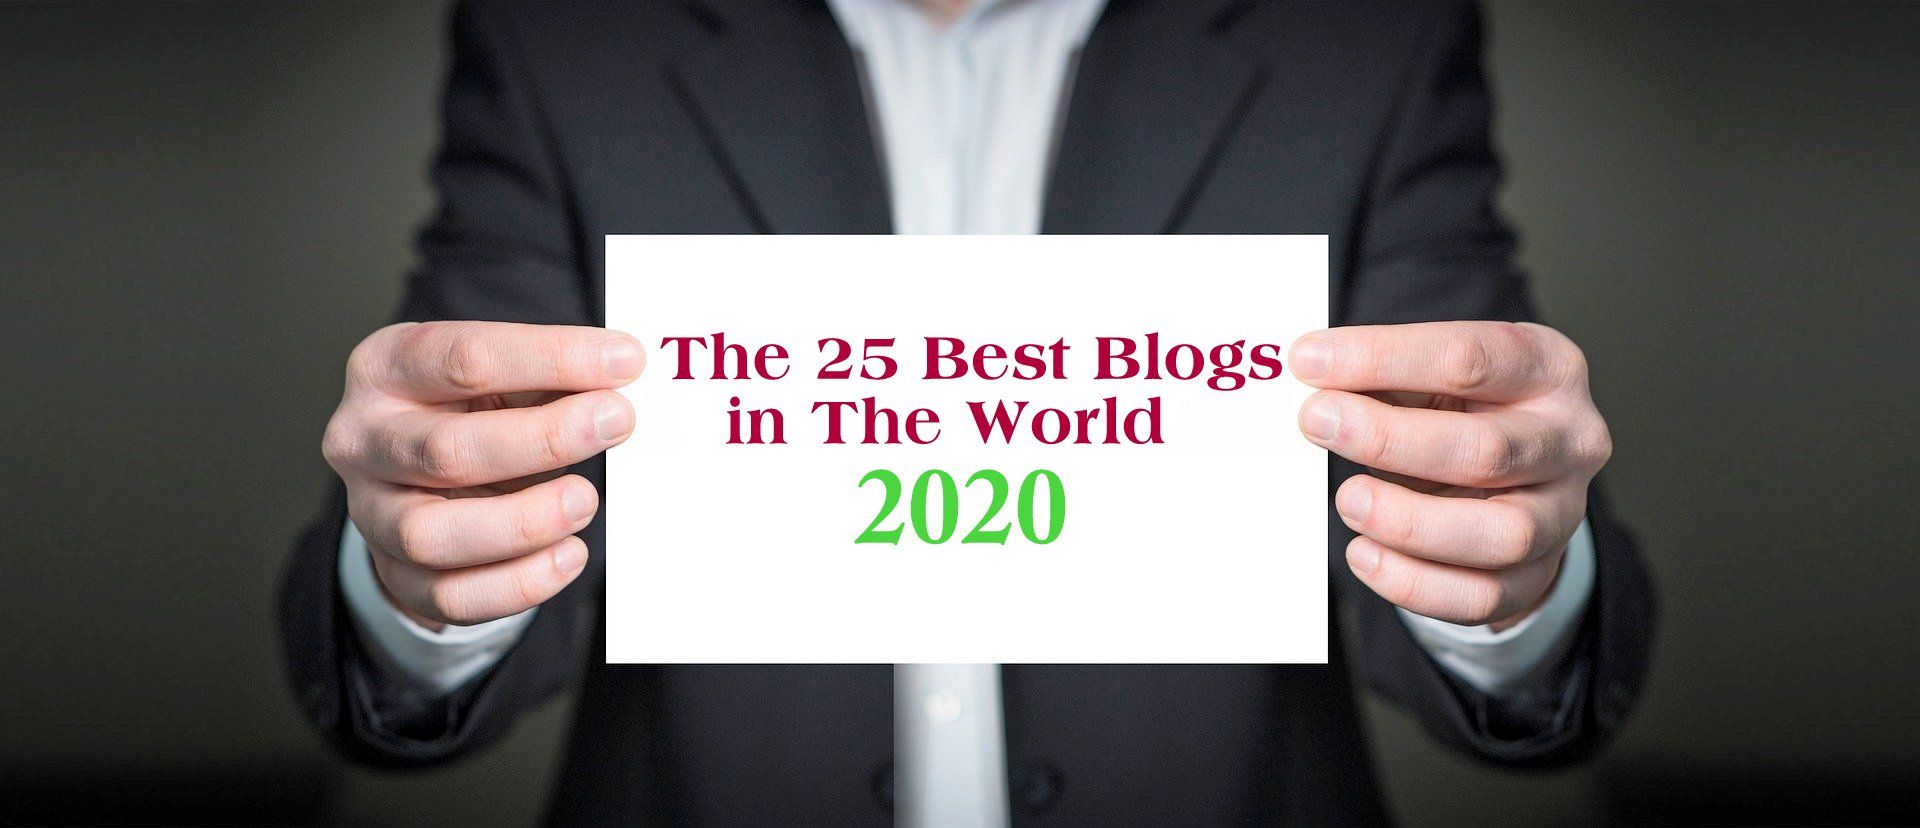 The 25 Best Blogs in The World You Should be Following in 2020